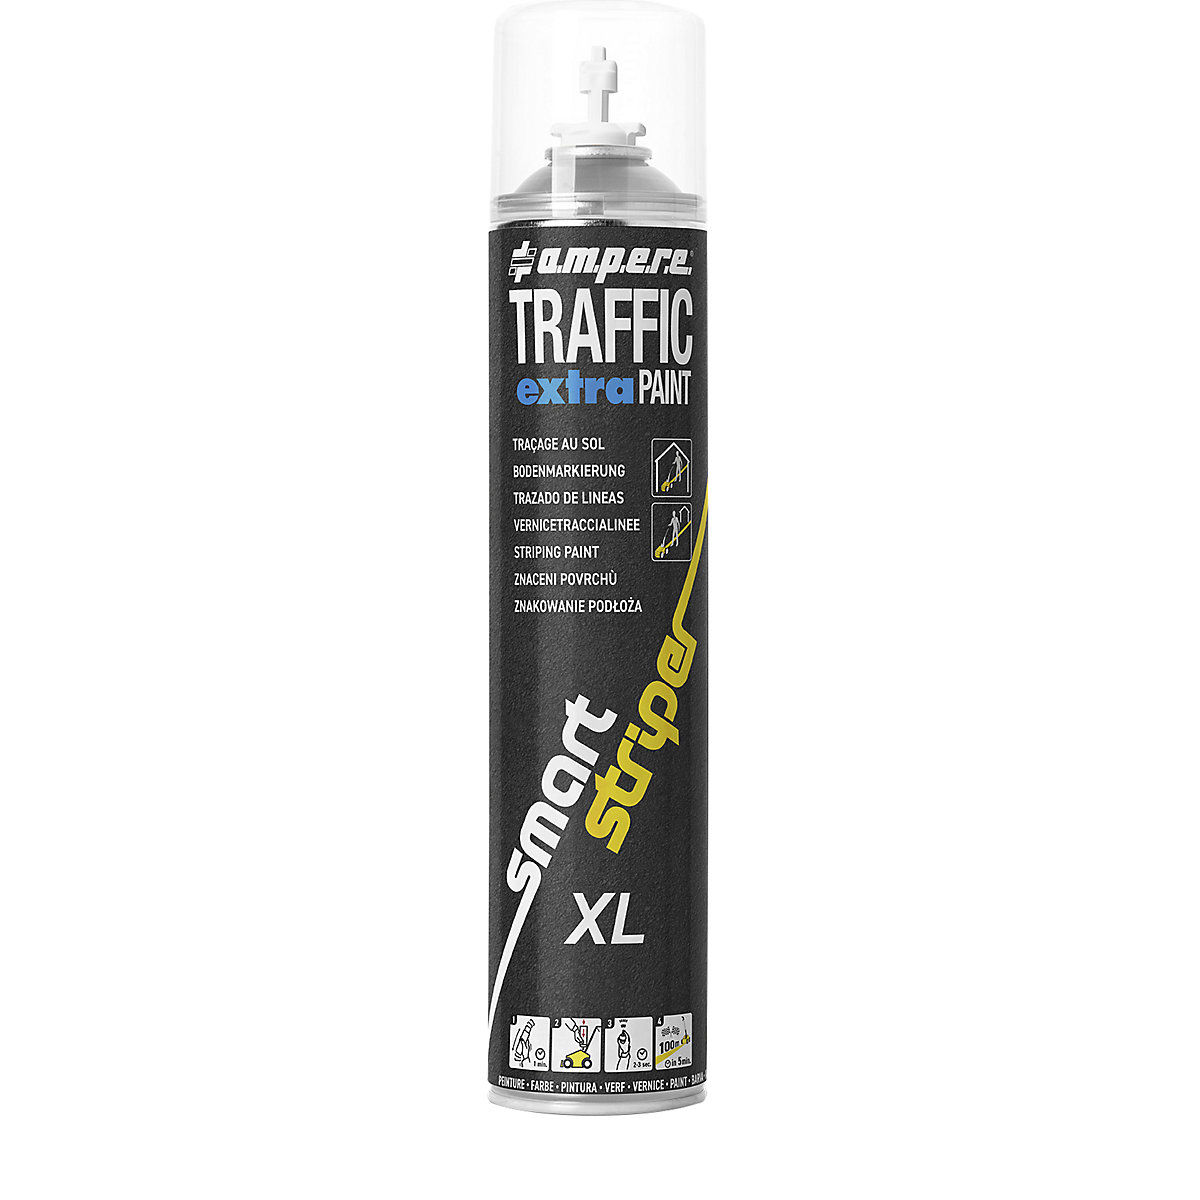 Vernice traccialinee Traffic extra Paint® XL – Ampere